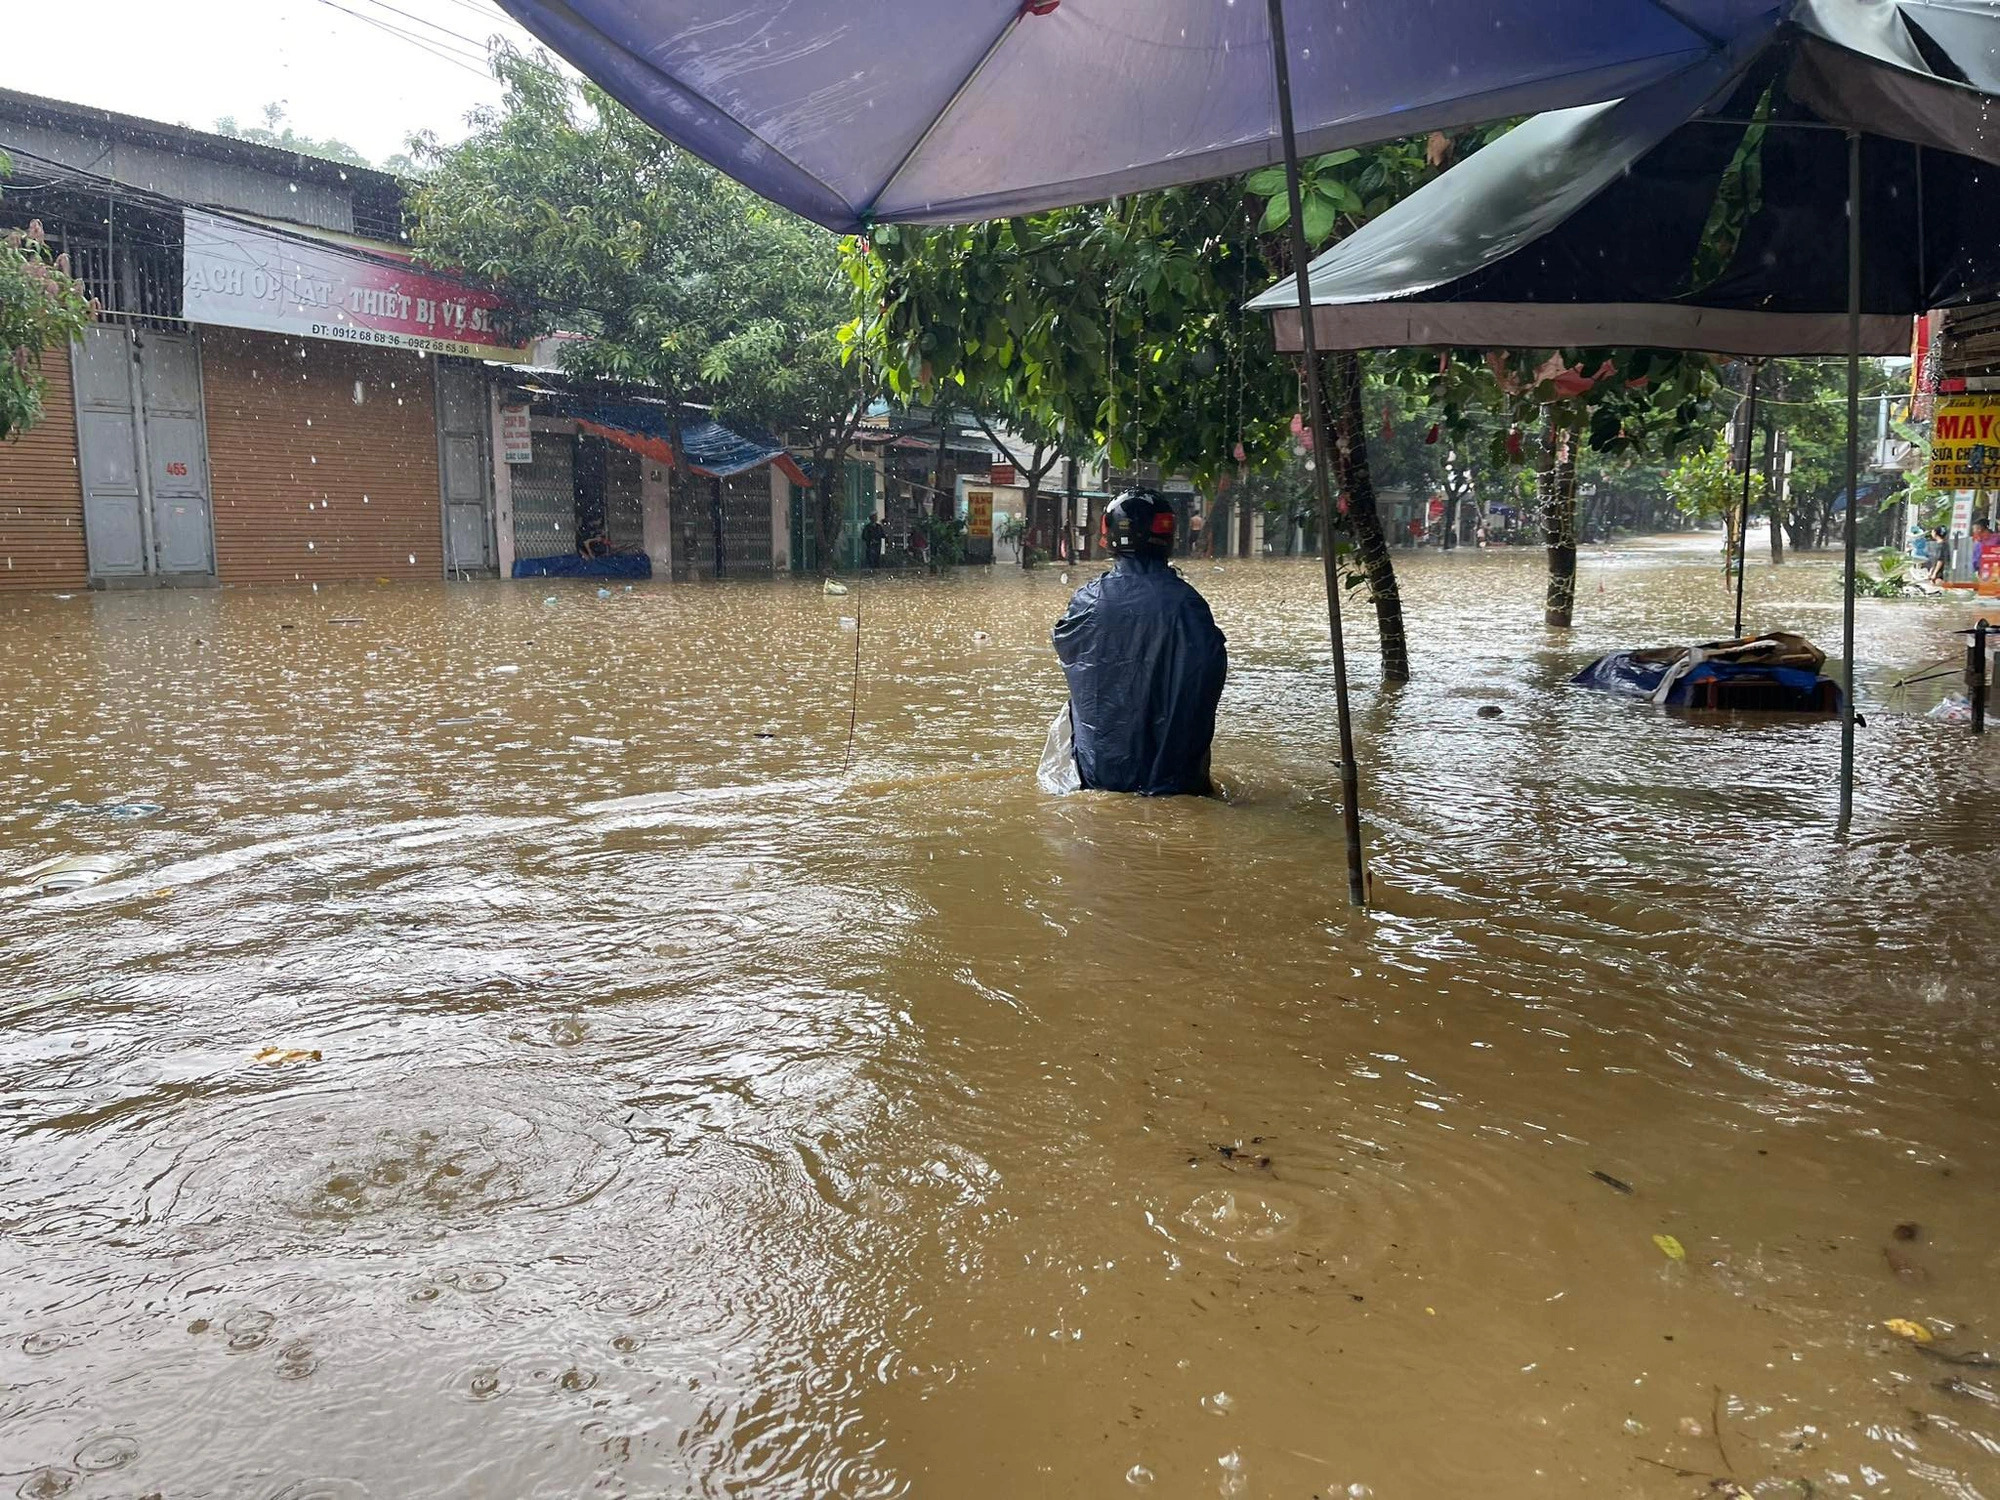 Some road sections were nearly one meter deep in water due to excessive rain, causing traffic gridlock in Lao Cai City, Lao Cai Province, northern Vietnam. Photo: Tien Ngoc / Tuoi Tre